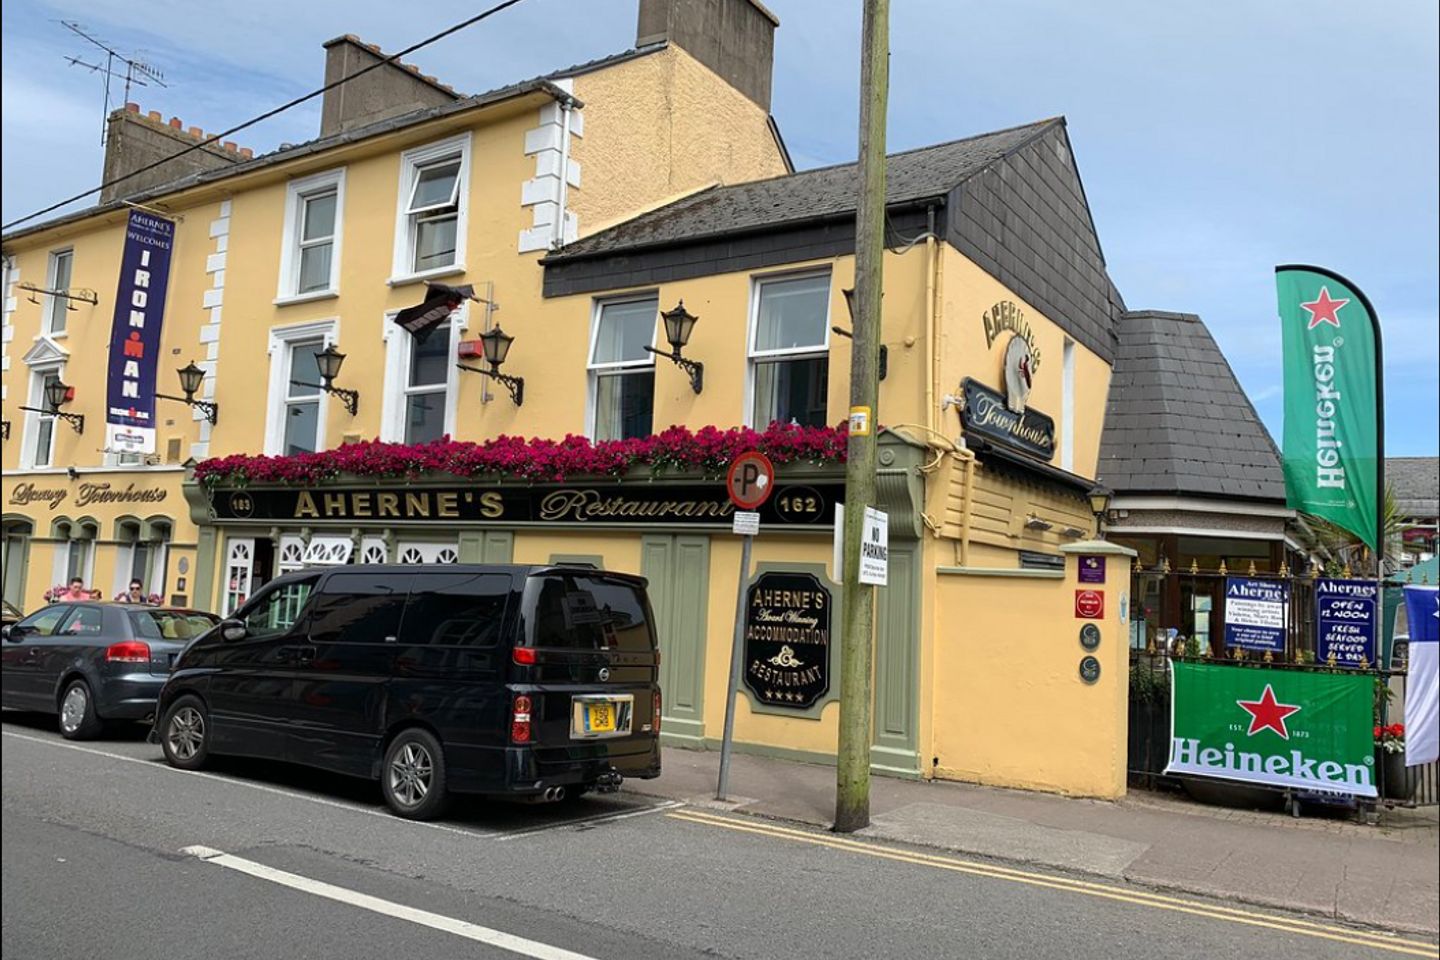 163 North Main Street, Youghal, Co. Cork, P36P029